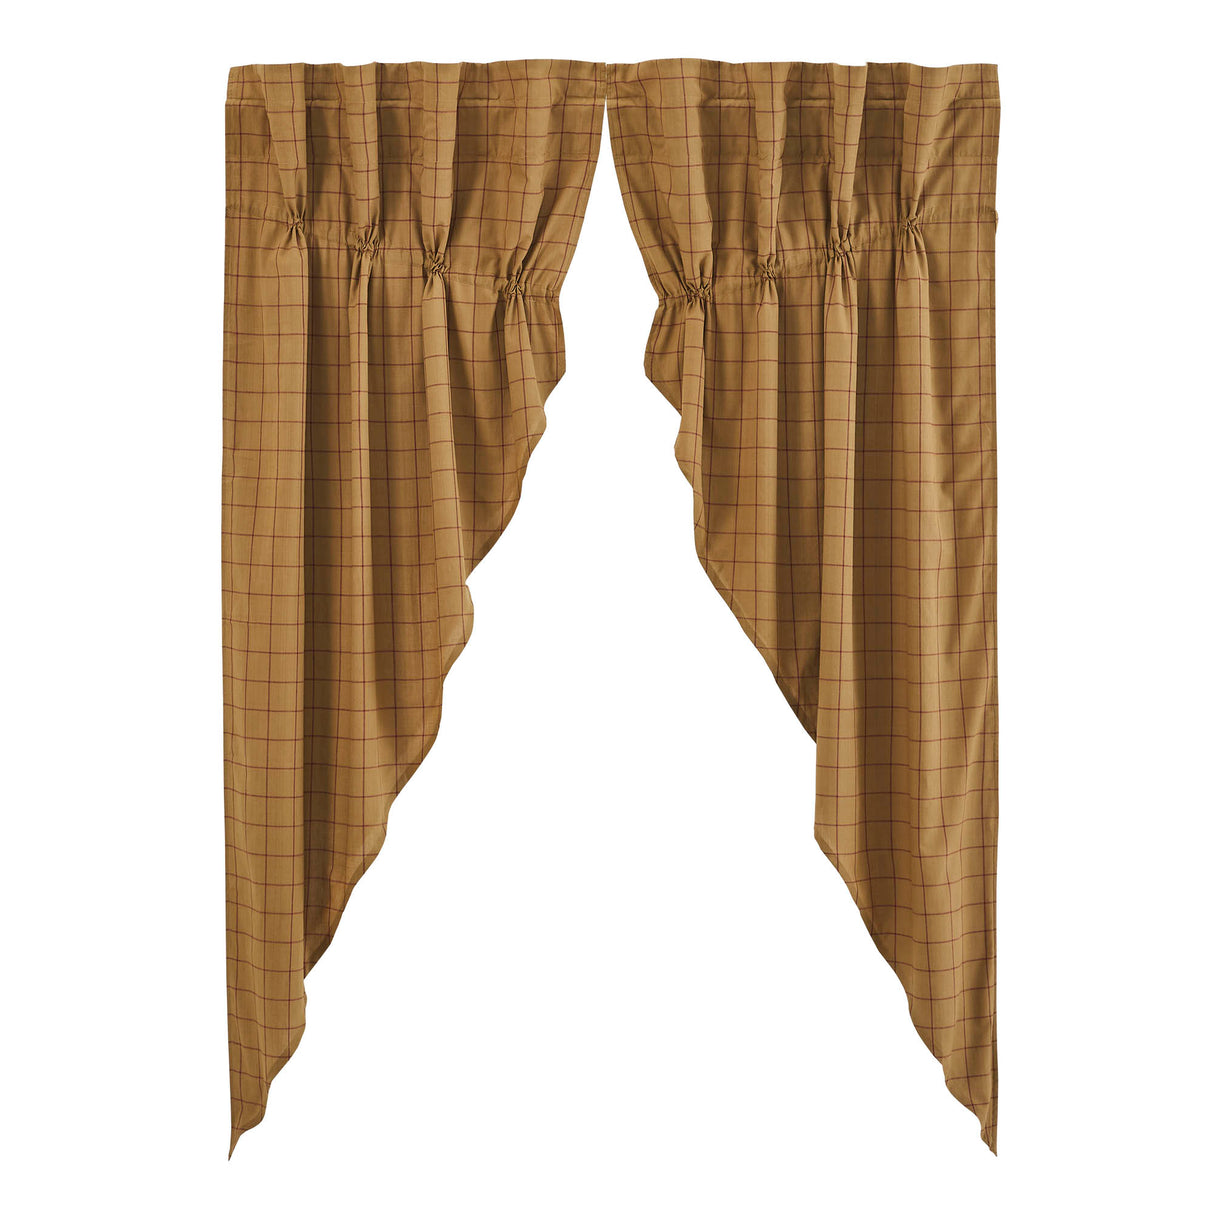 84415-Connell-Prairie-Short-Panel-Set-of-2-63x36x18-image-3